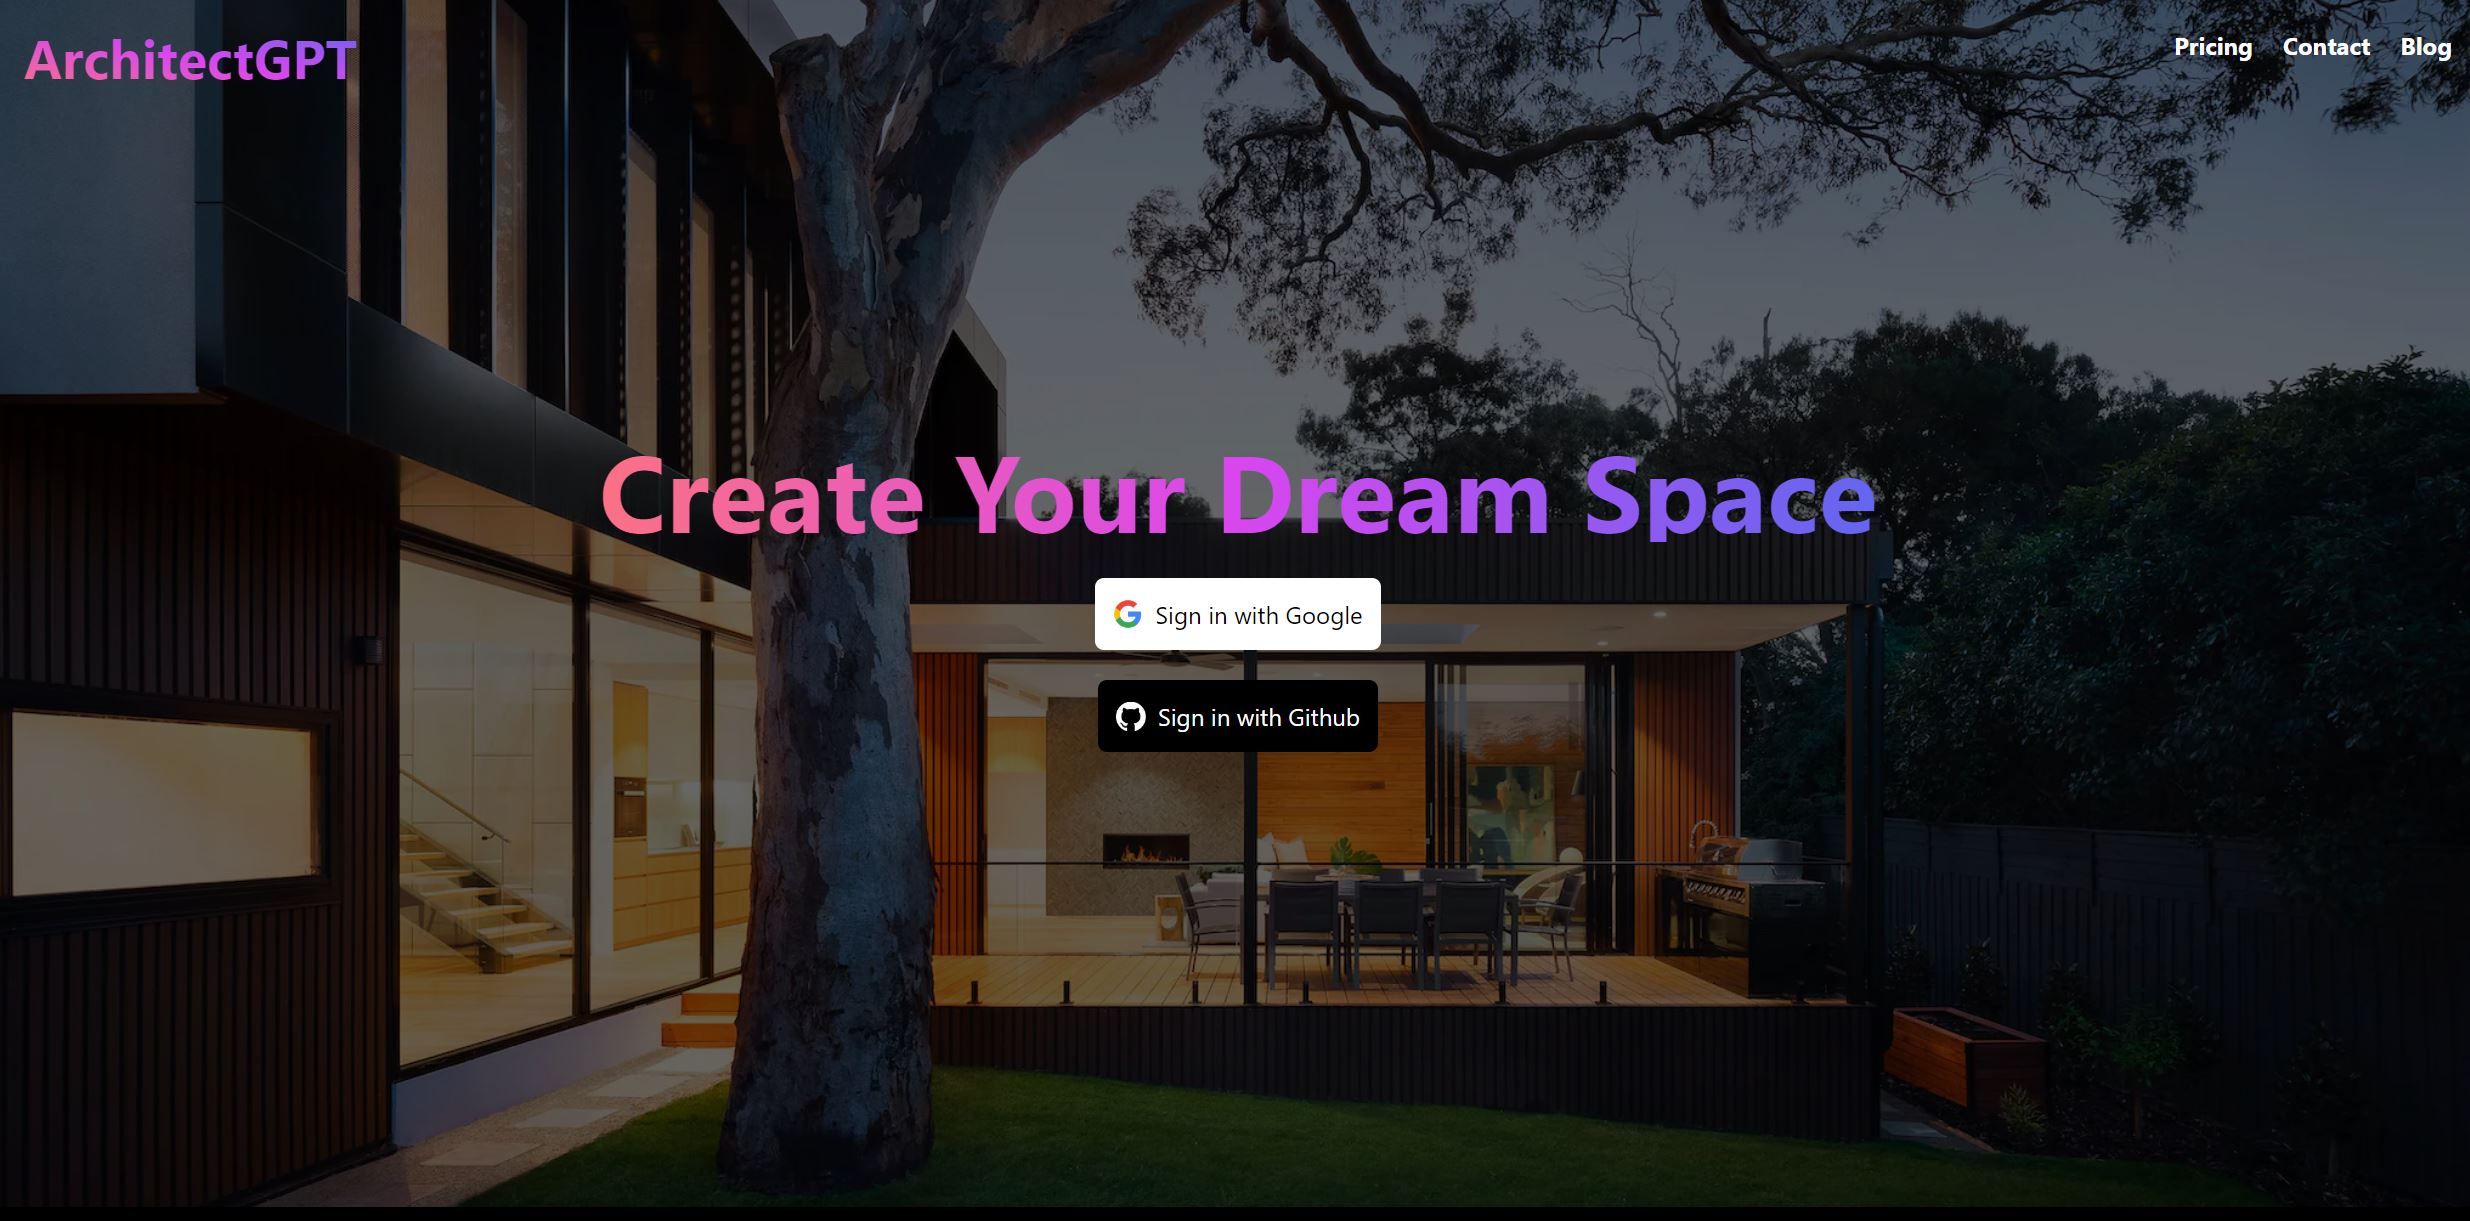 ArchitectGPTThis is an AI powered design tool that creates customizable home